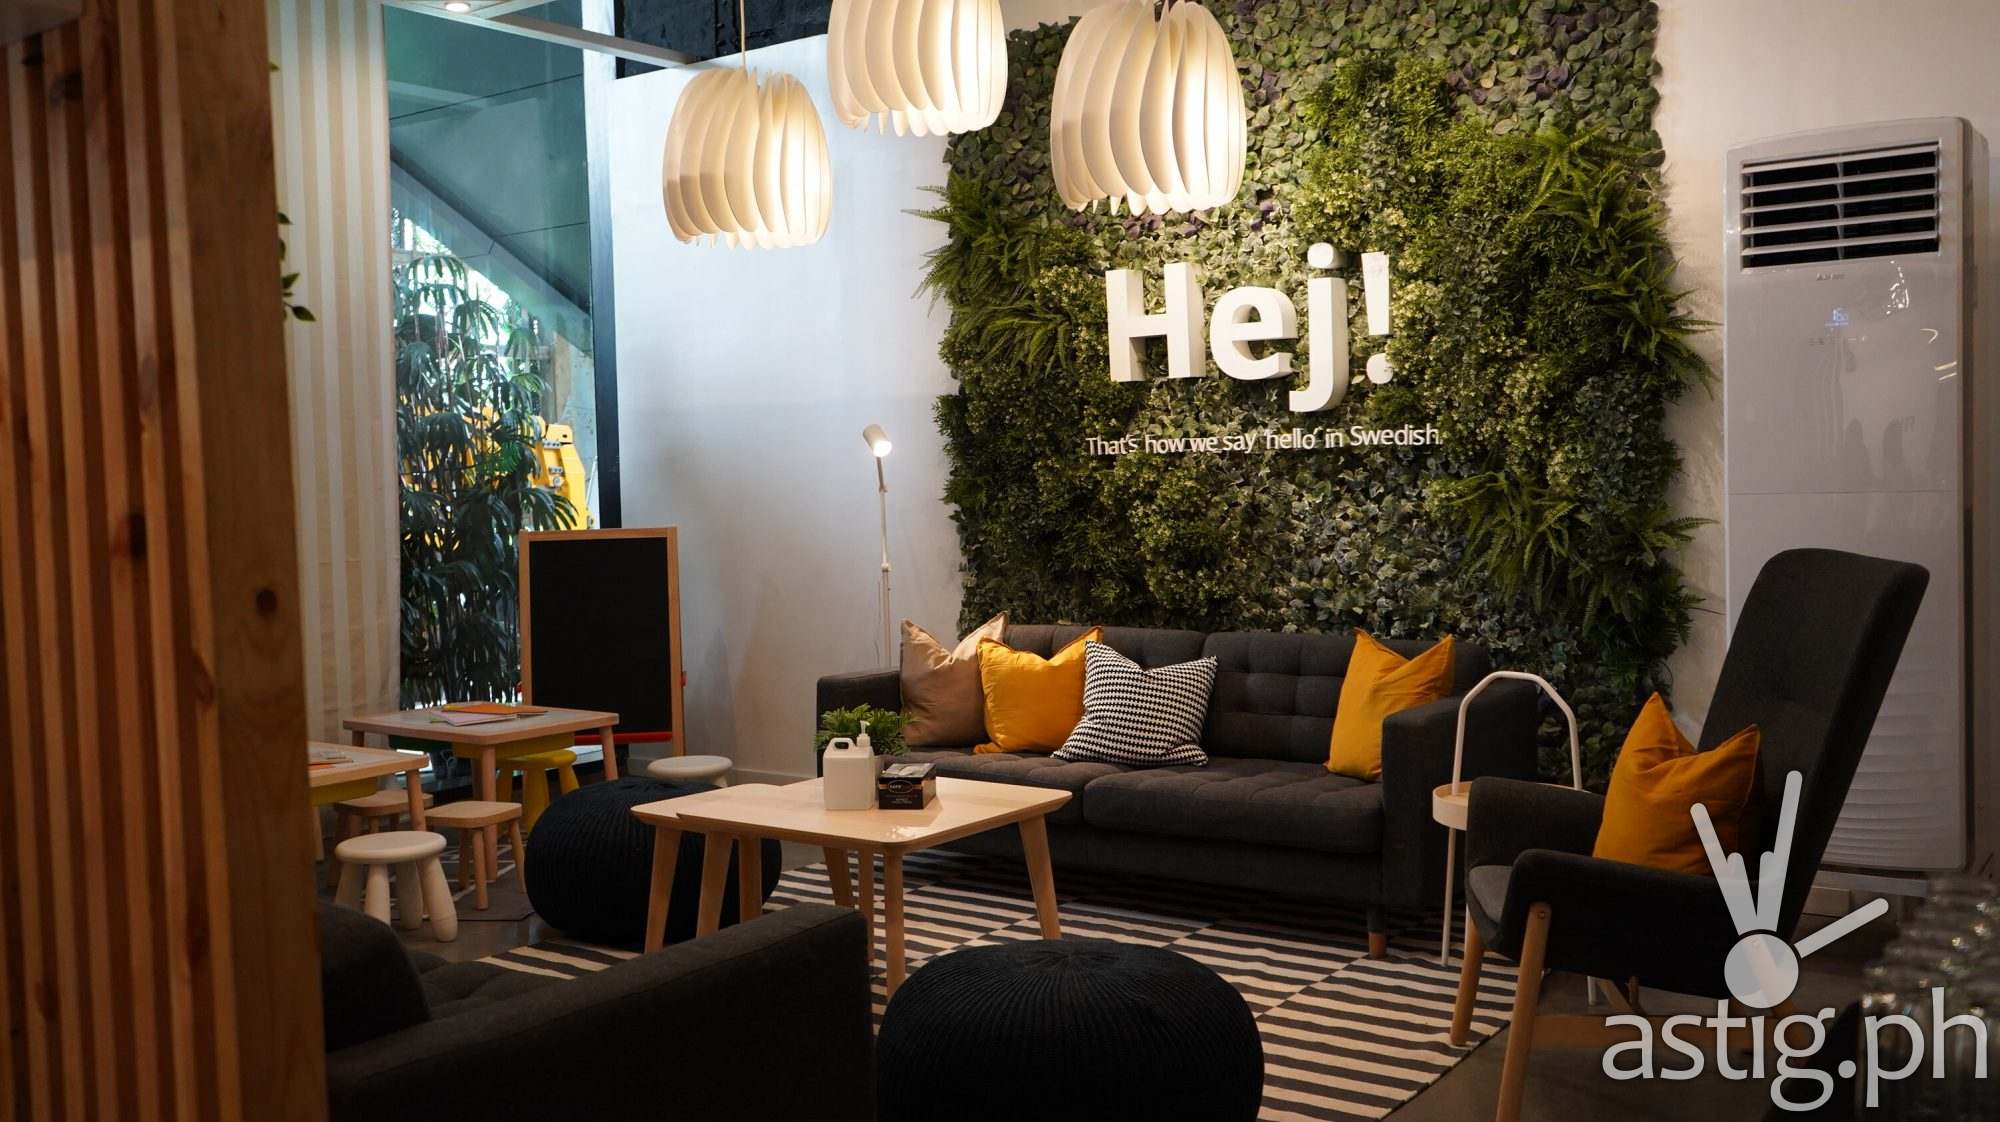 IKEA Philippines greets Cebuanos “Hej!” as they open their newest collection point in Cebu City